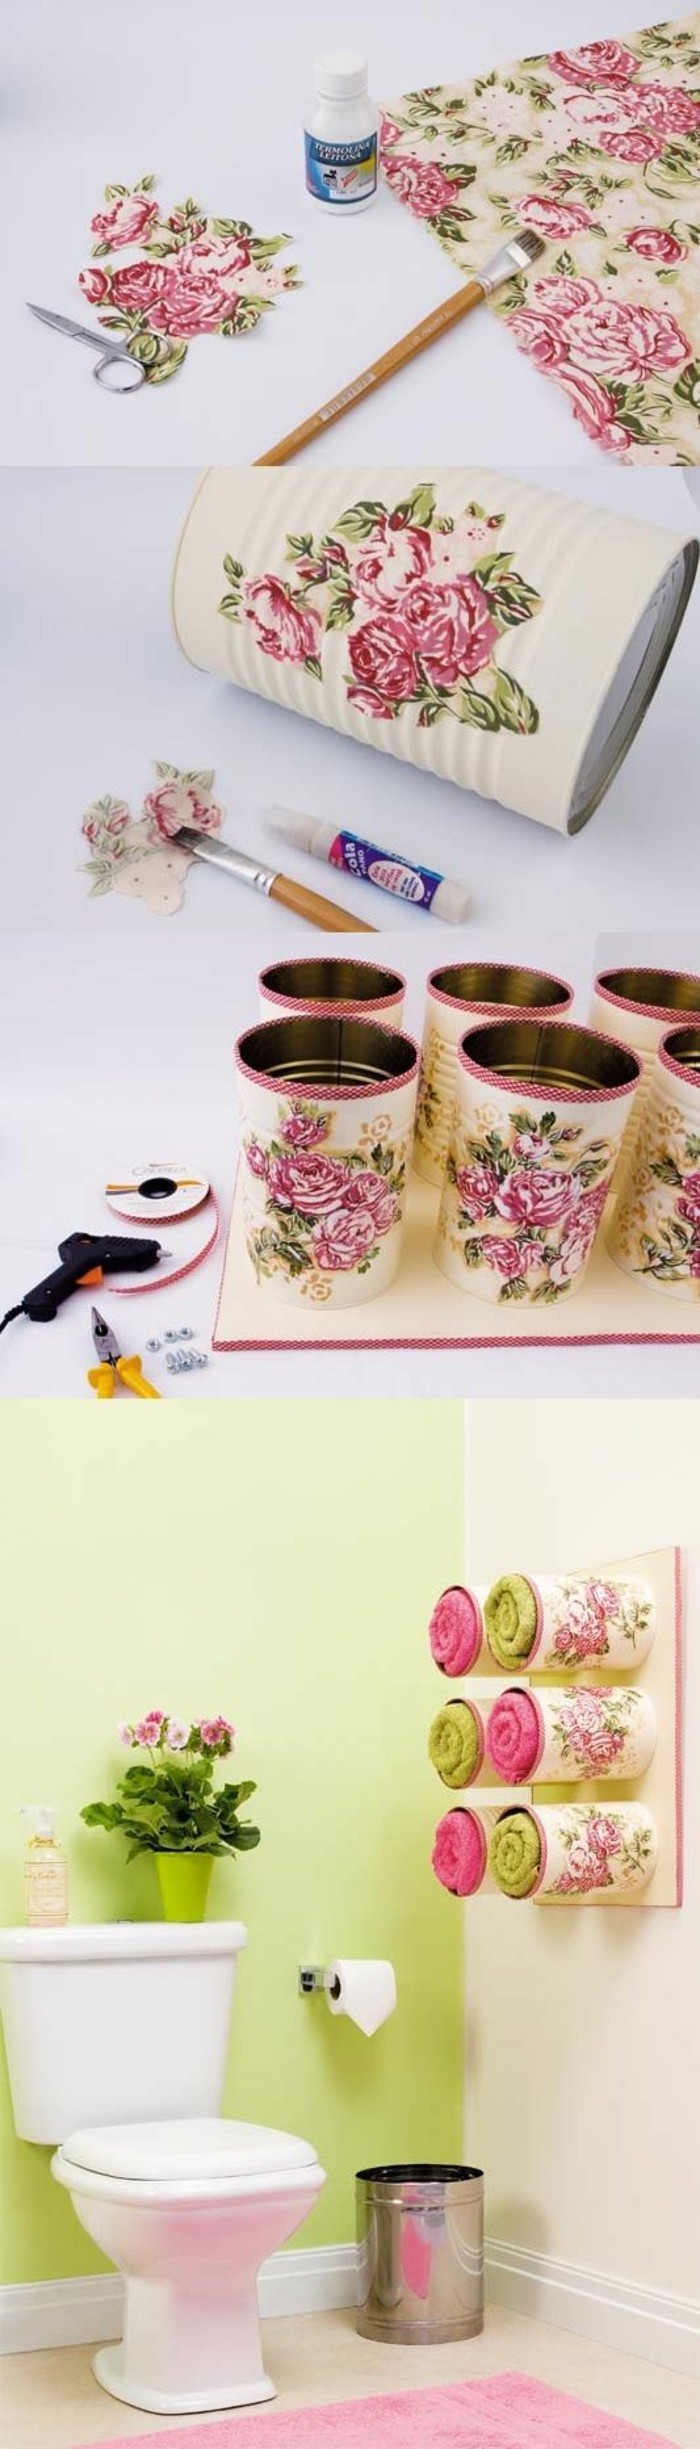 empty tin cans, floral paper and glue, near small scissors and paint brush, six large cans decorated with decoupage, containing towels and stuck on wooden board, mounted on a toilet wall